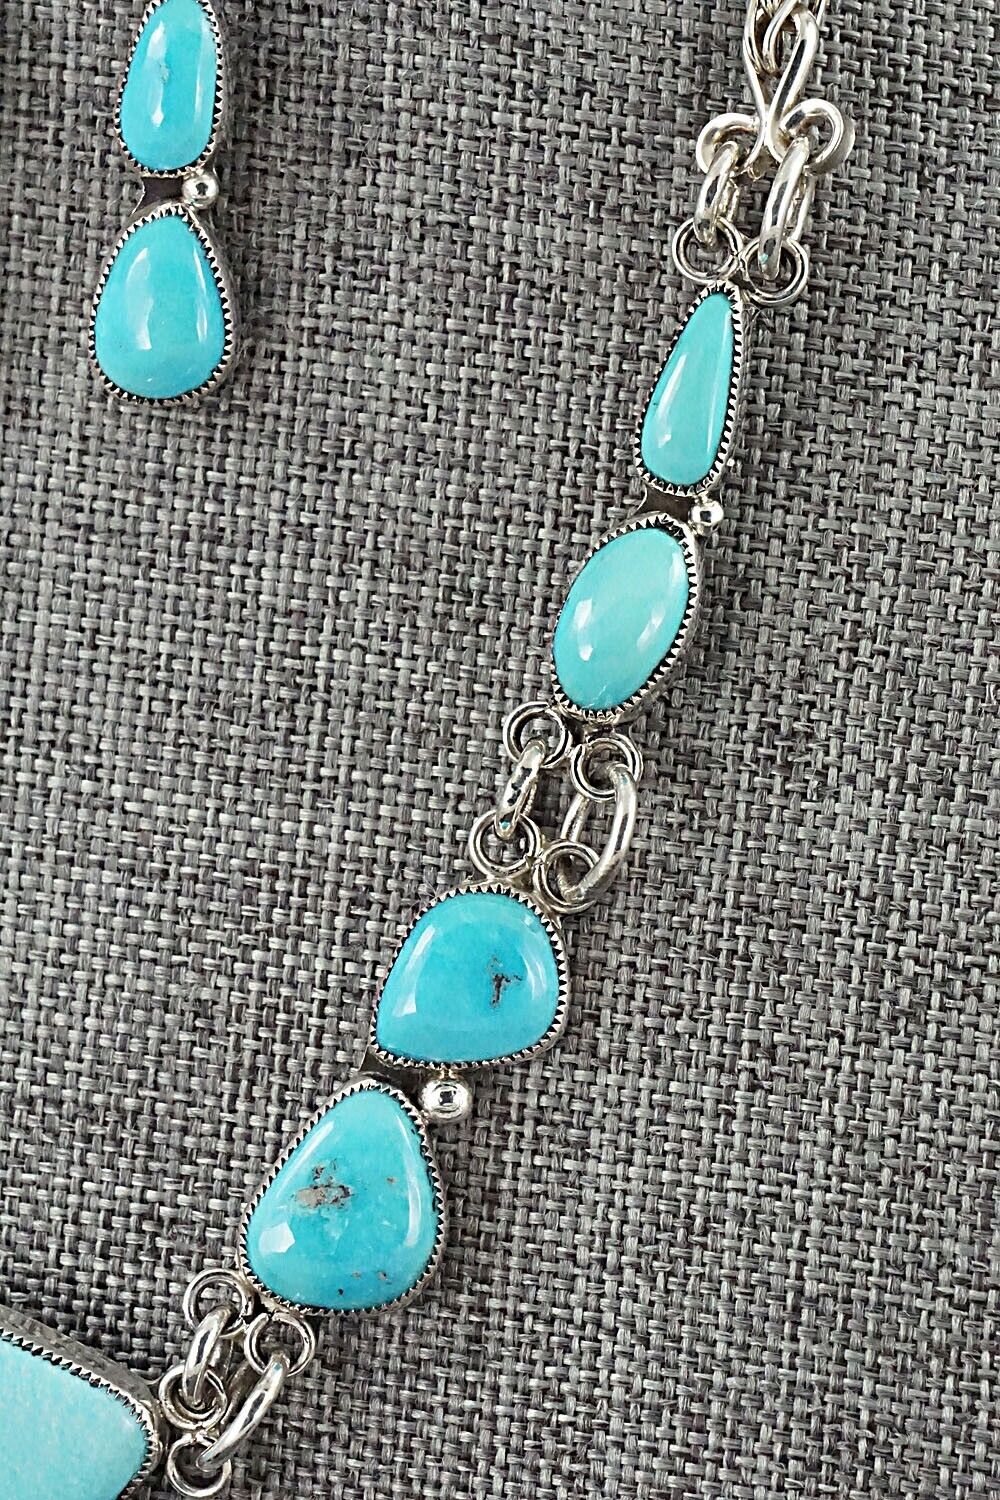 Turquoise & Sterling Silver Necklace and Earrings Set - Smokey Gchachu